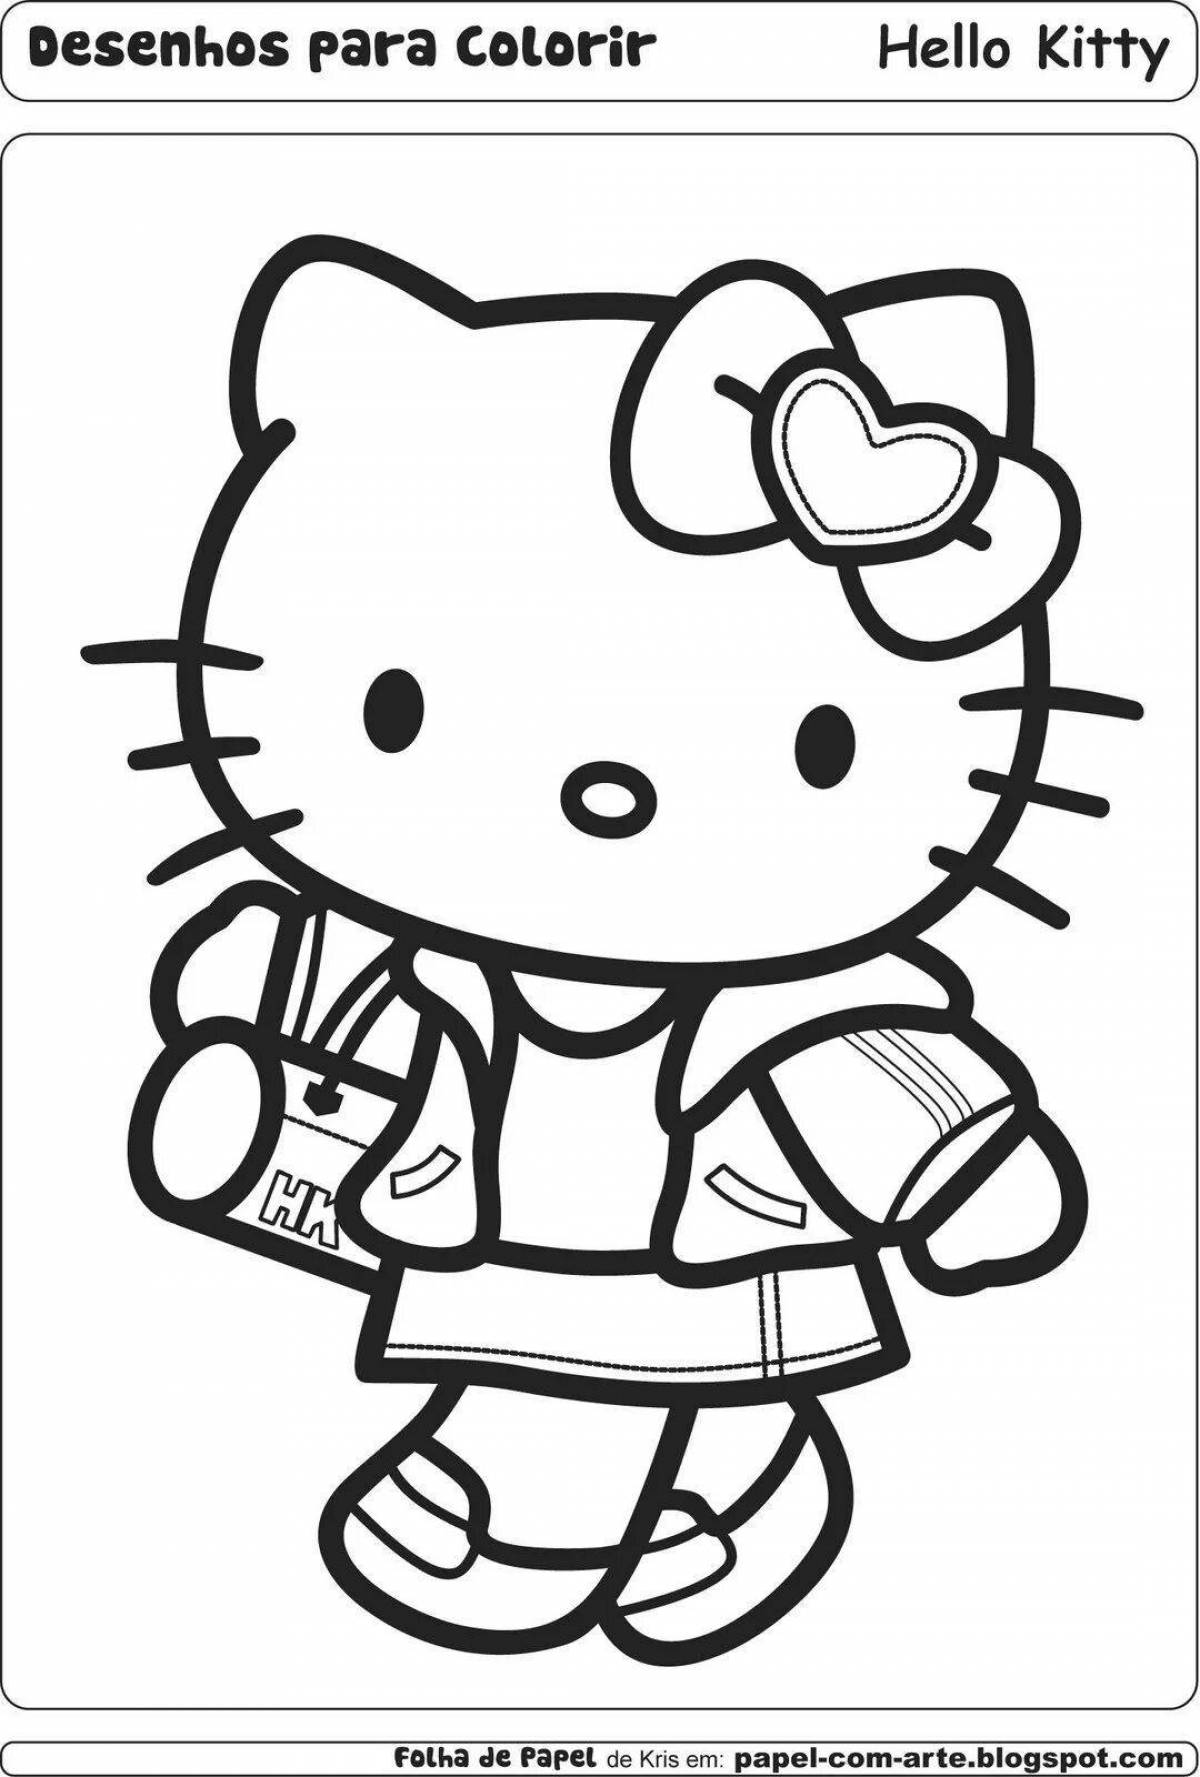 Awesome coloring hello kitty aesthetic